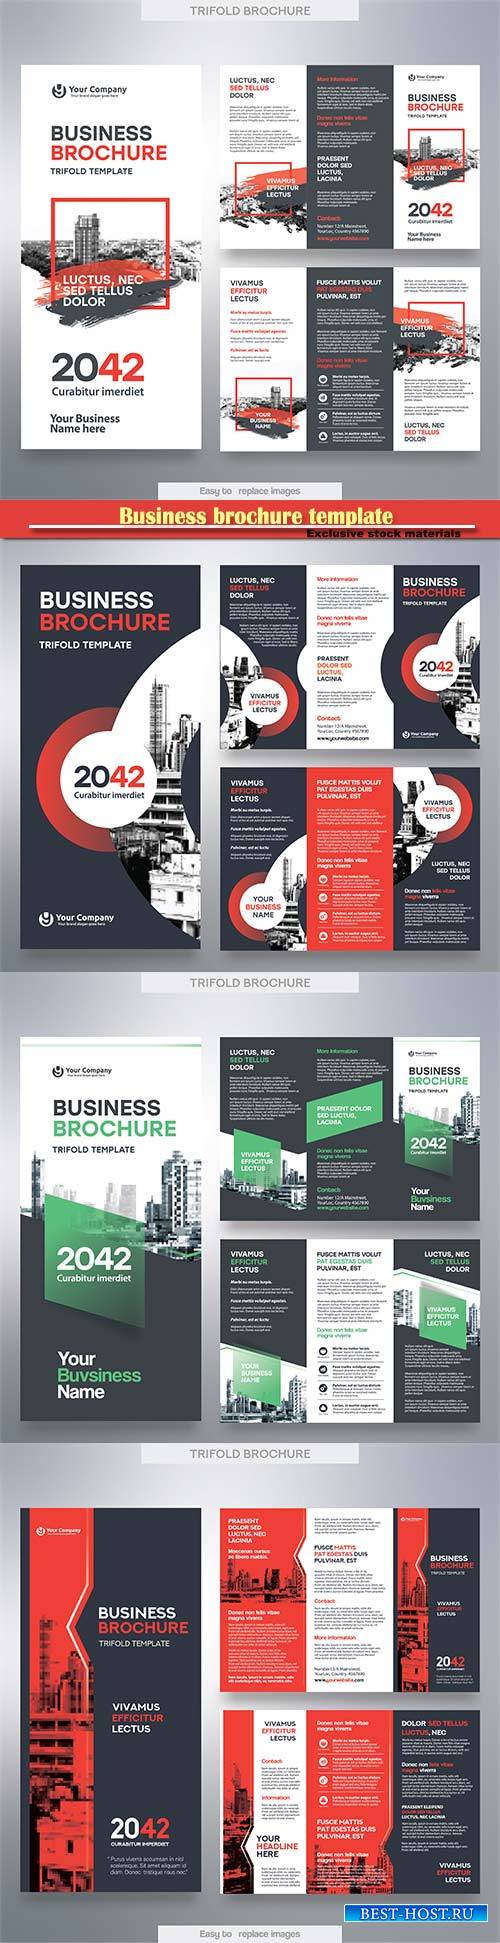 Business brochure template in tri fold layout vector design